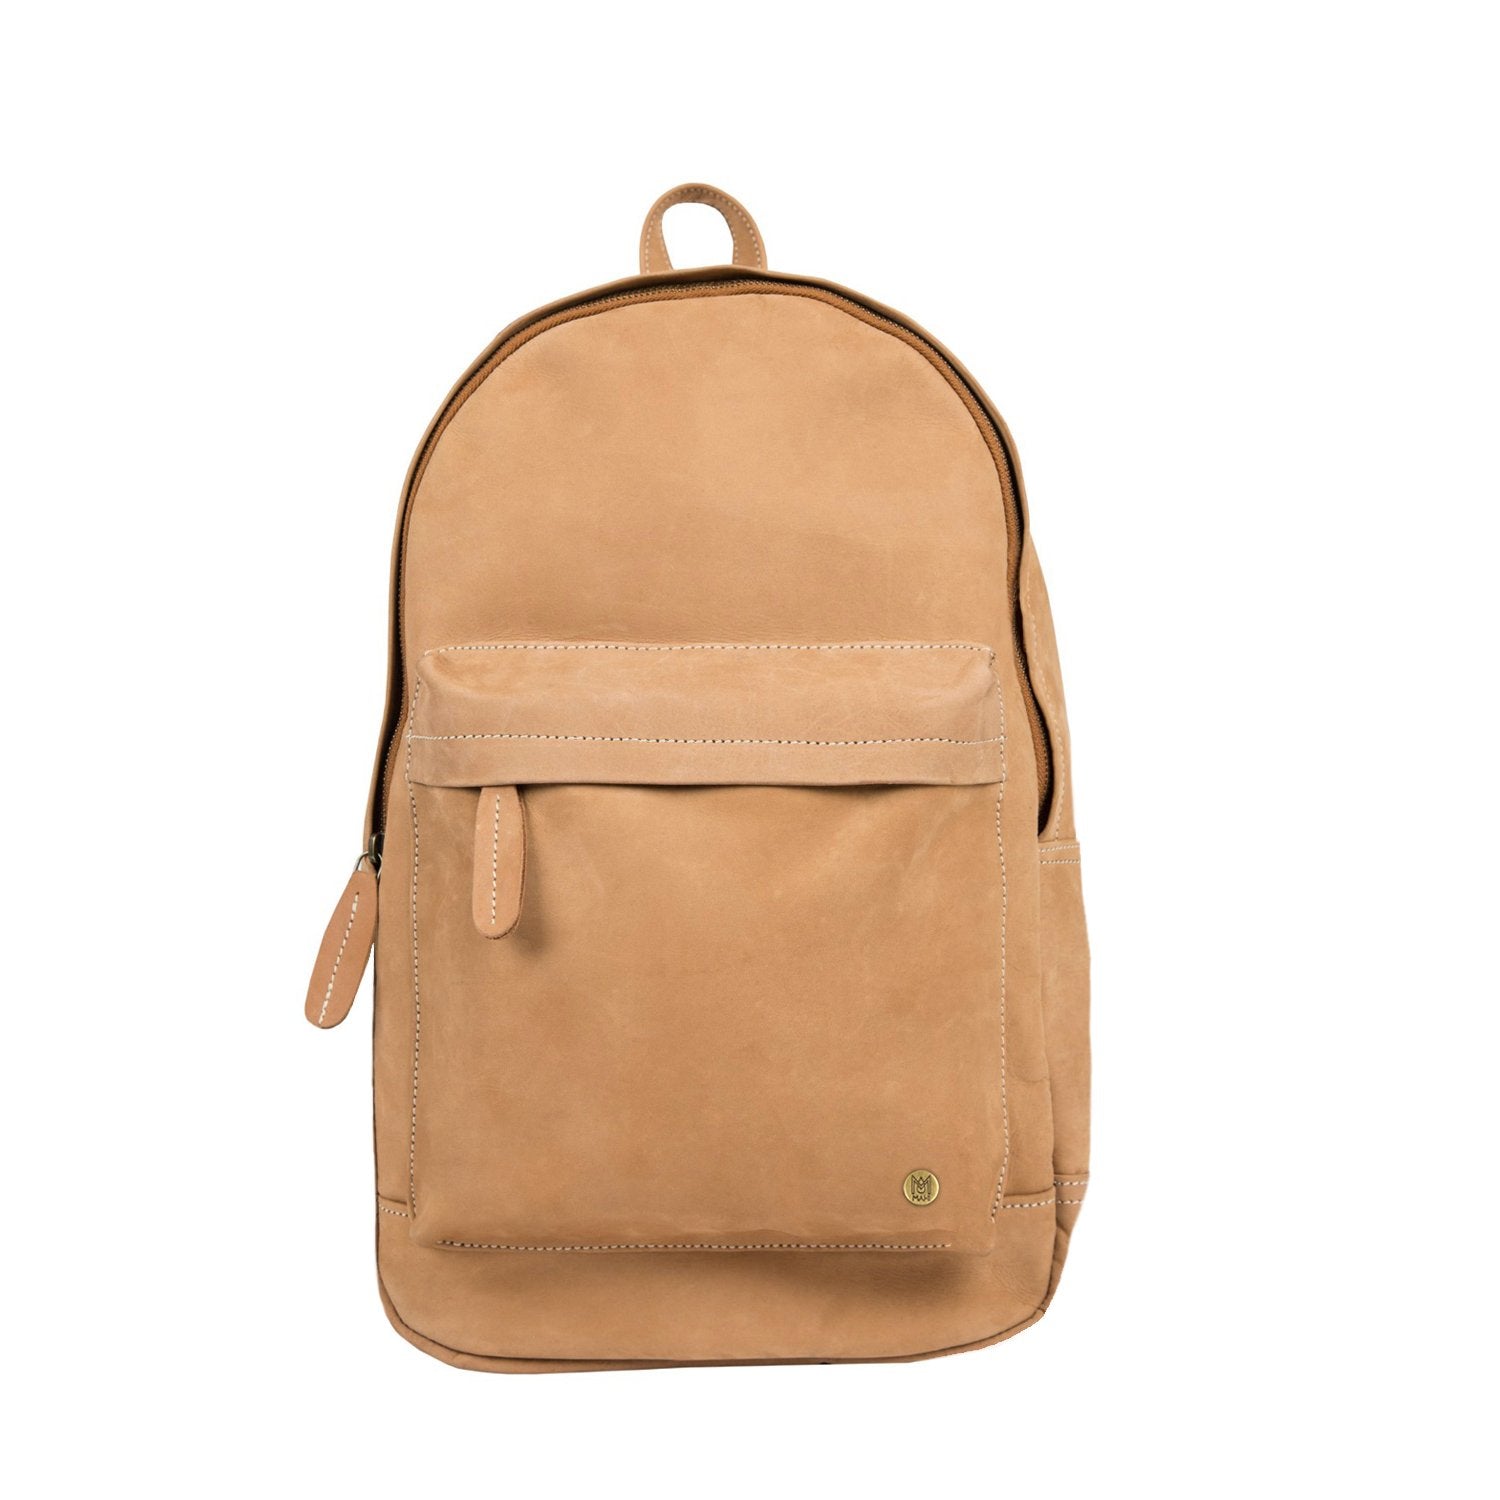 Suede Leather Backpack for Work, School or College